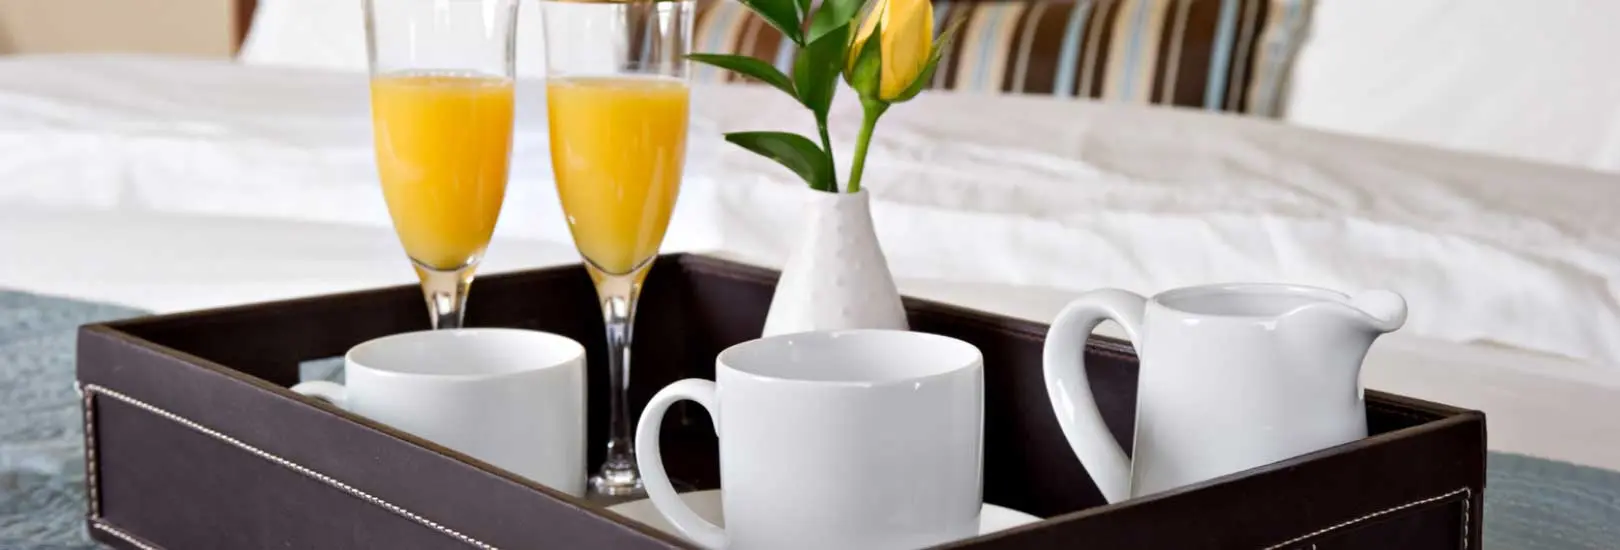 Drinks tray with coffee, orange juice and a flower center piece